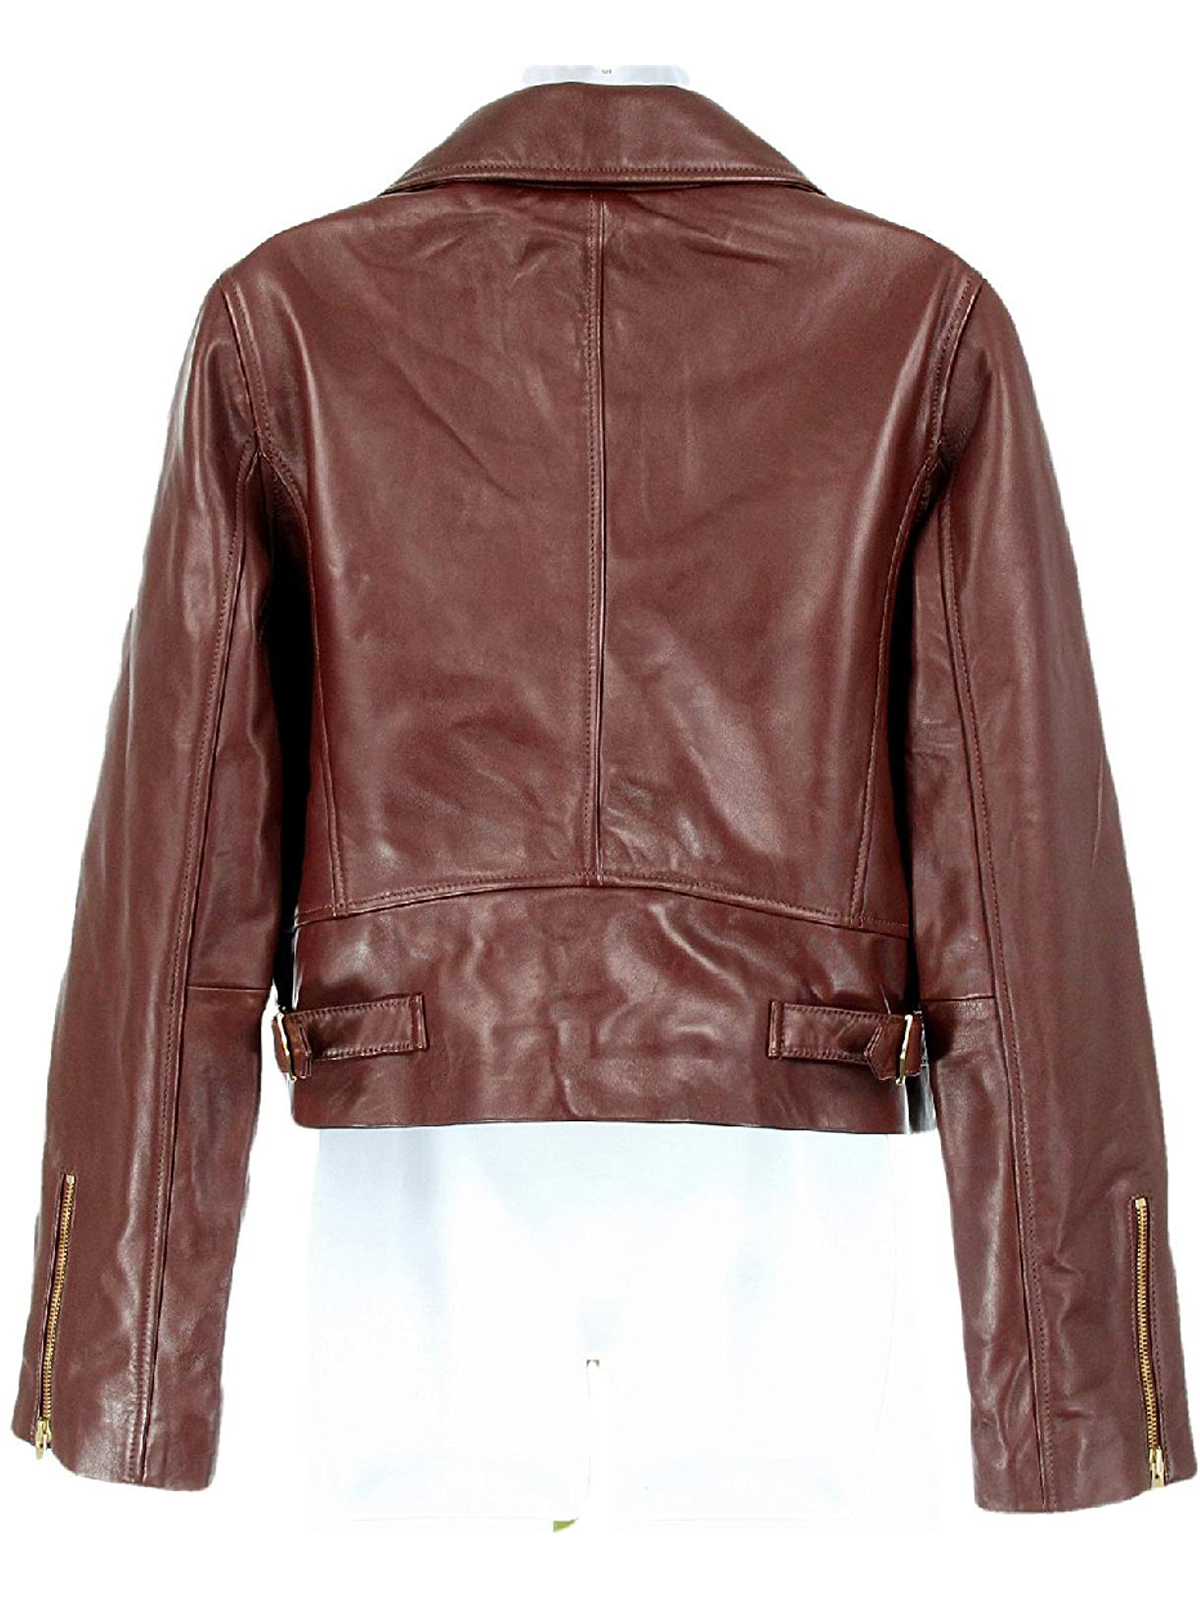 J Crew Collection Leather Motorcycle Jacket